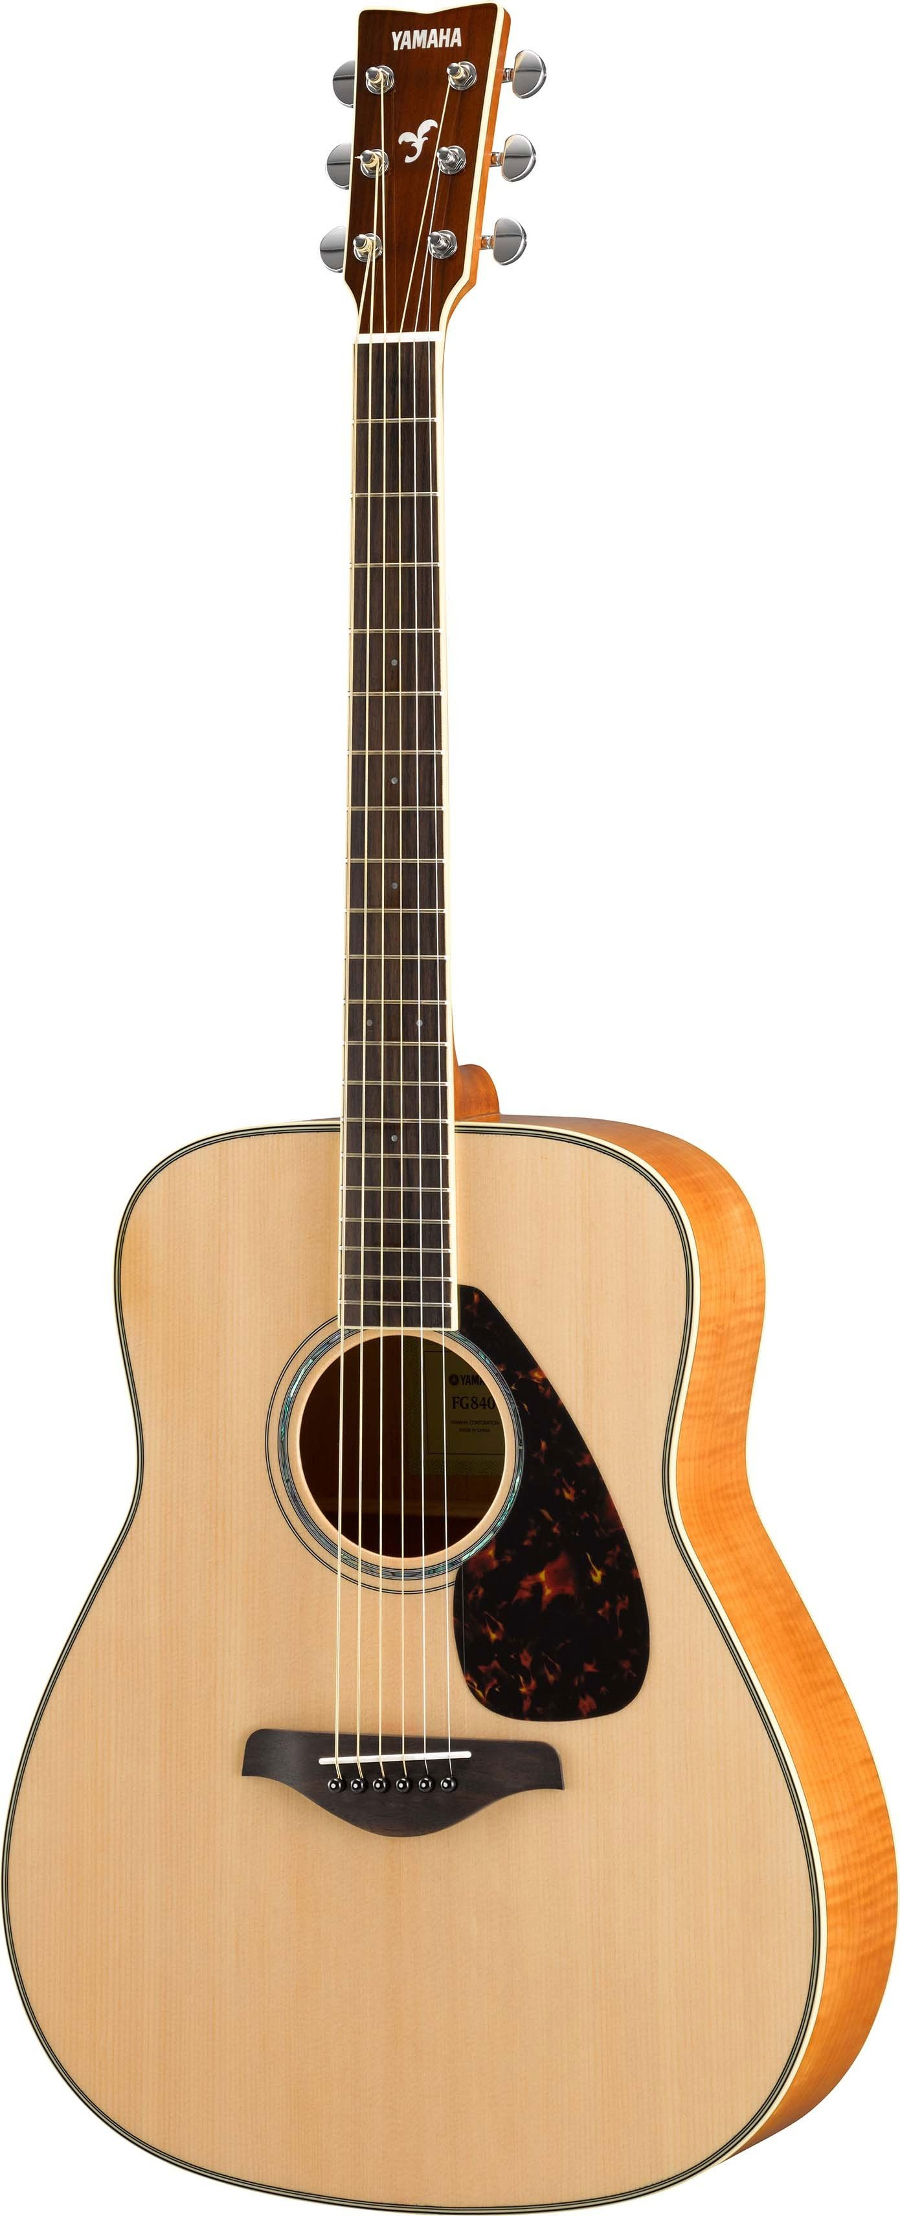 Yamaha FG840 Dreadnought Acoustic Guitar, Sitka Spruce Top and Flame Maple Back and Sides for sale